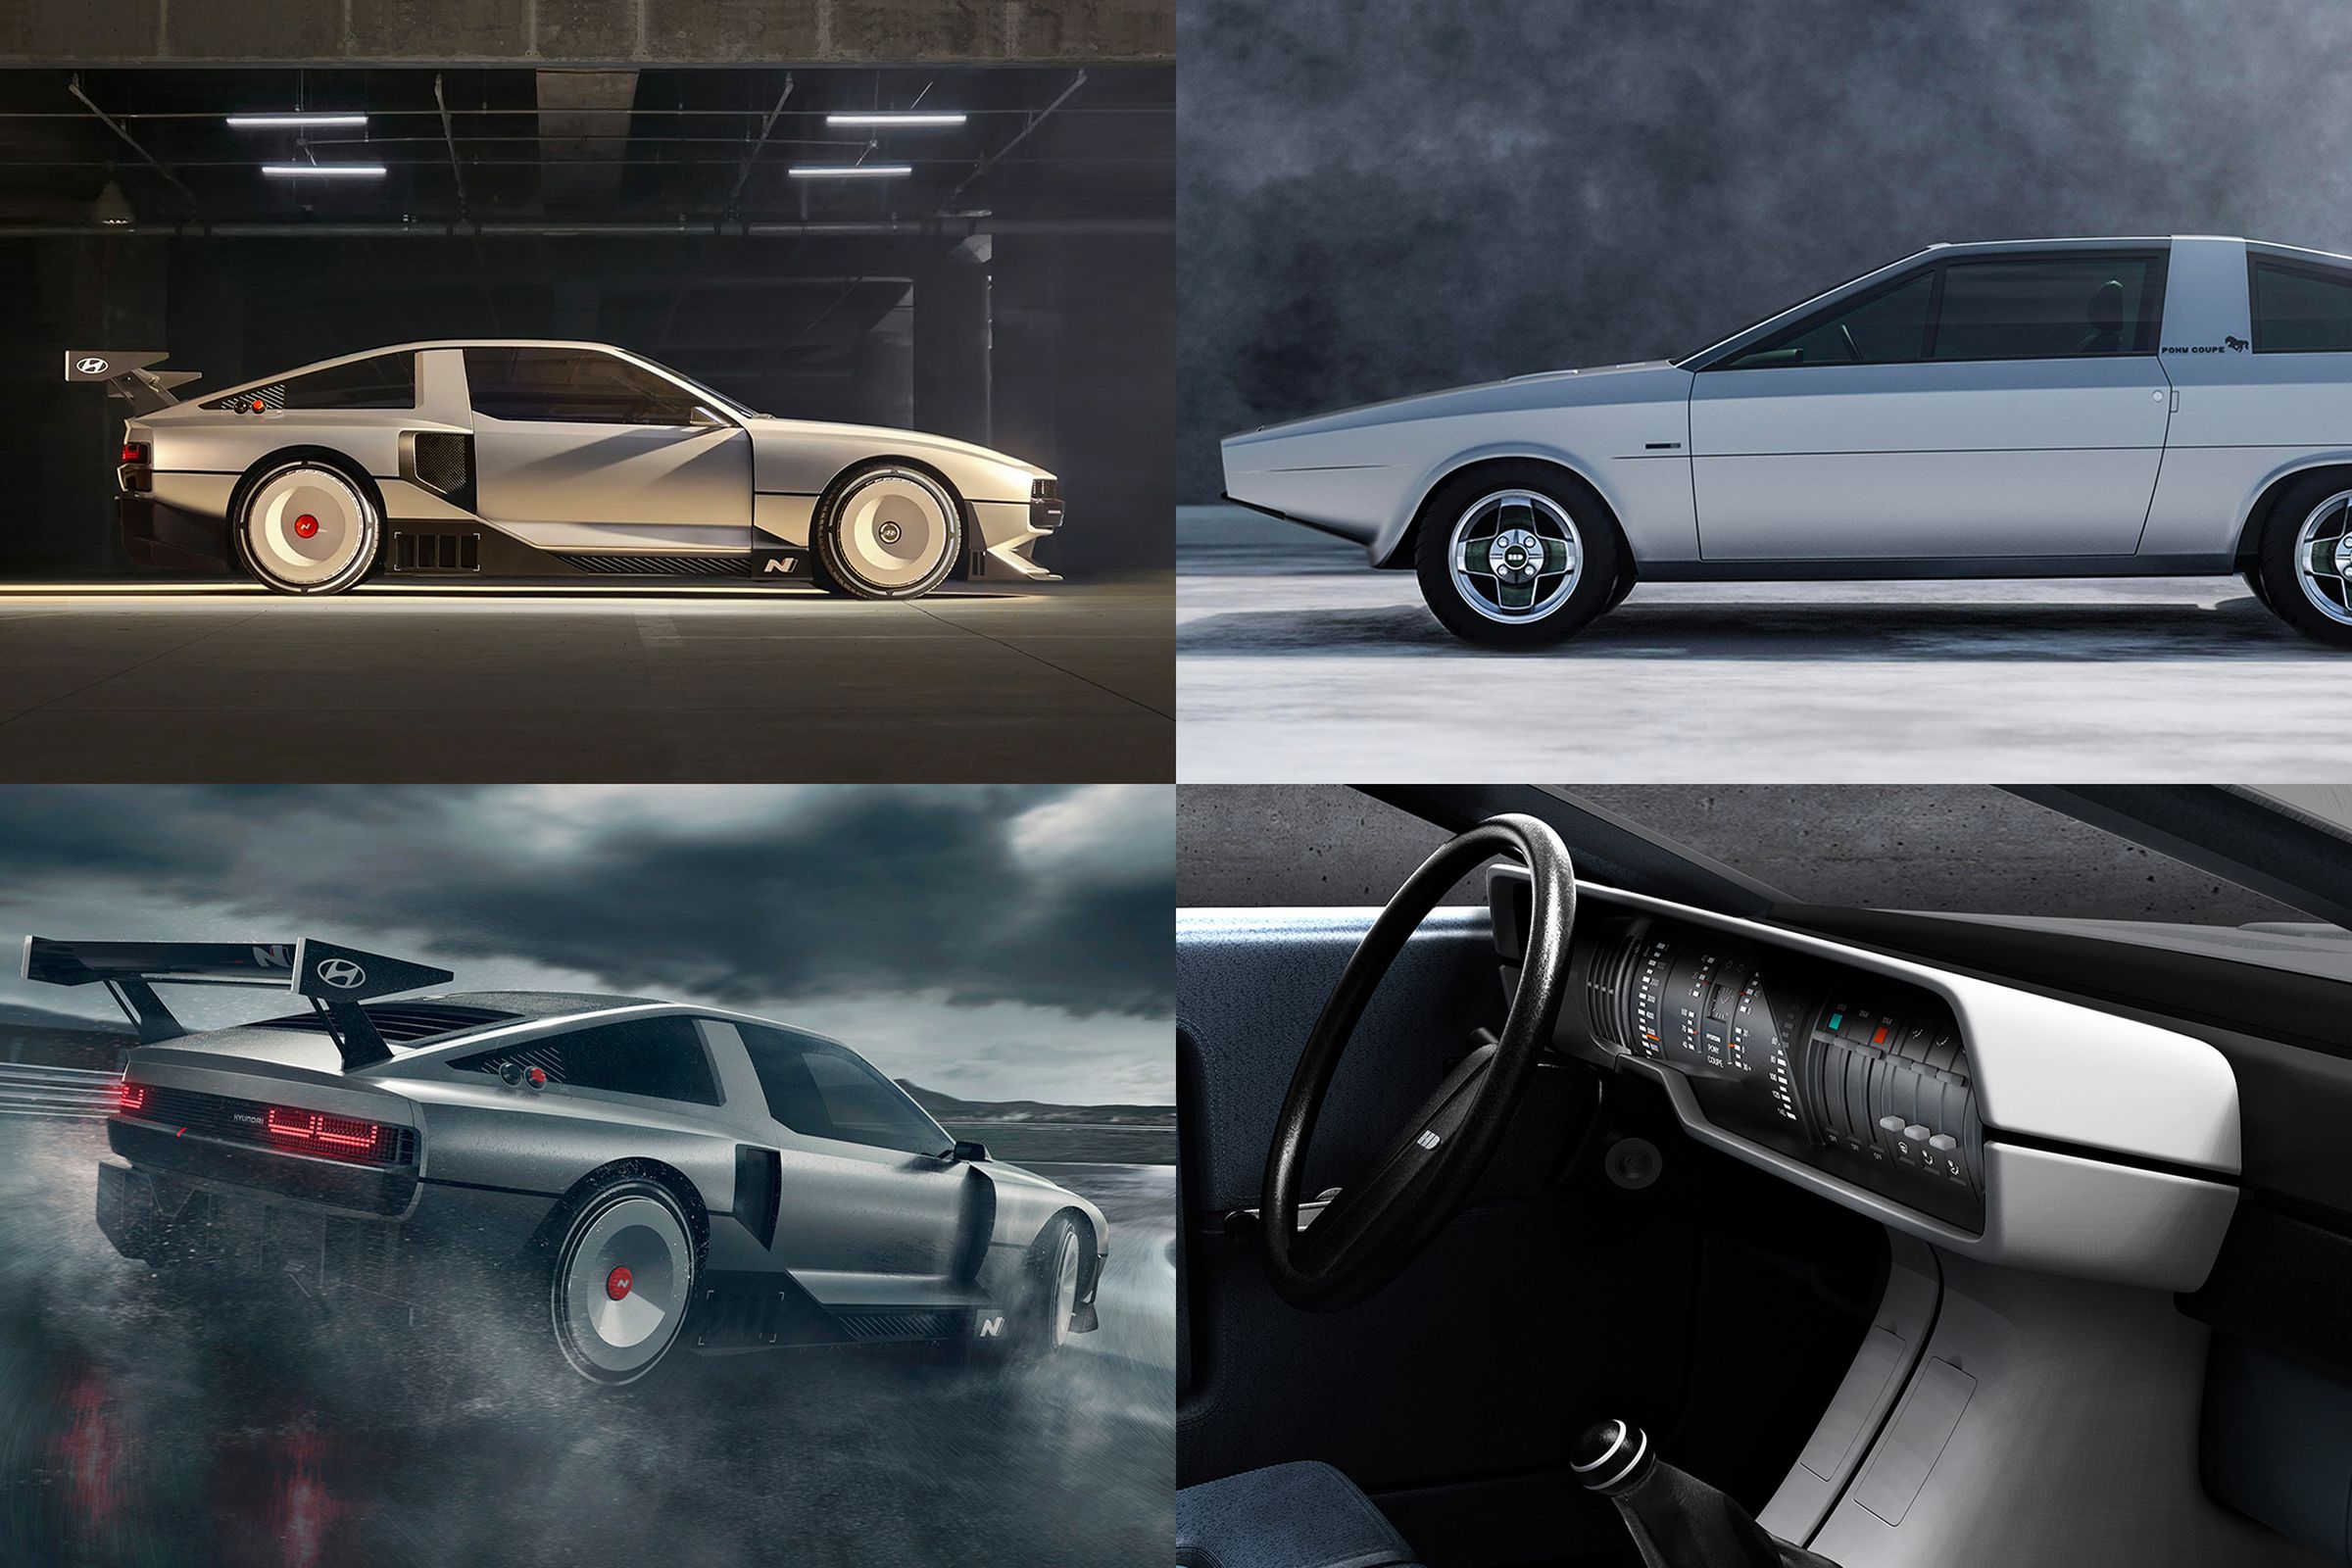 Foru images combined, showing clockwise from top left, the Hyundai N Vision 74 concept car, an external shot of the restored 1974 Hyundai Pony Coupe concept, an internal shot of the gauges in the Pony Coupe concept, and the Hyundai N Vision 74 EV again.